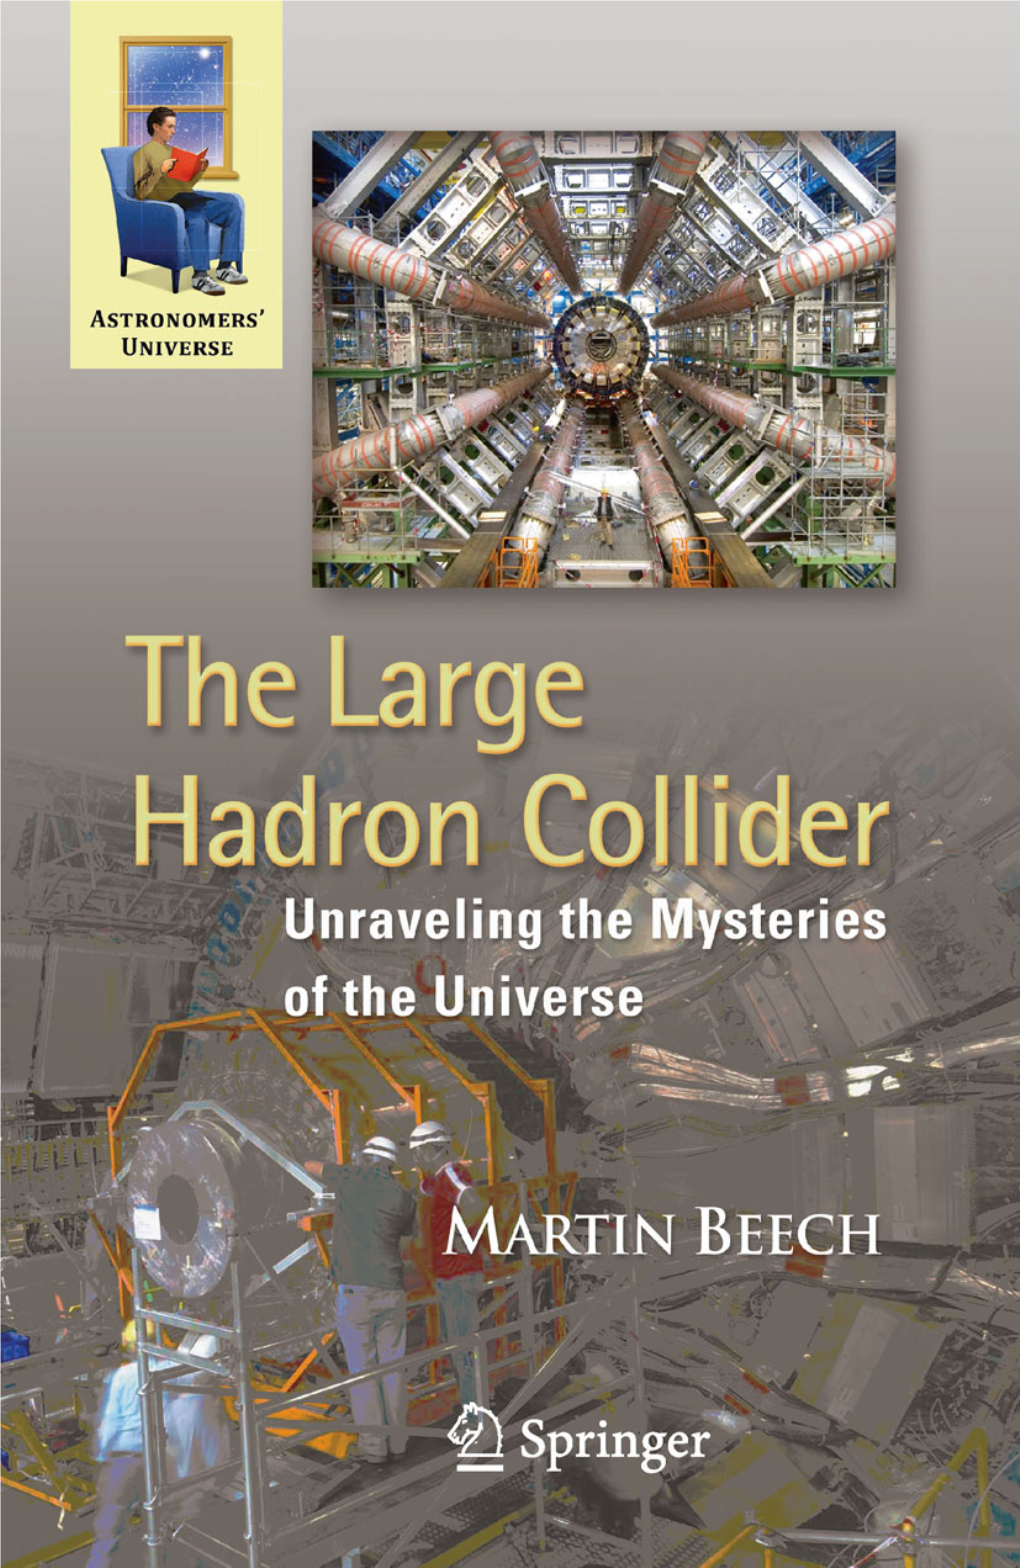 The Large Hadron Collider: Unraveling the Mysteries of The